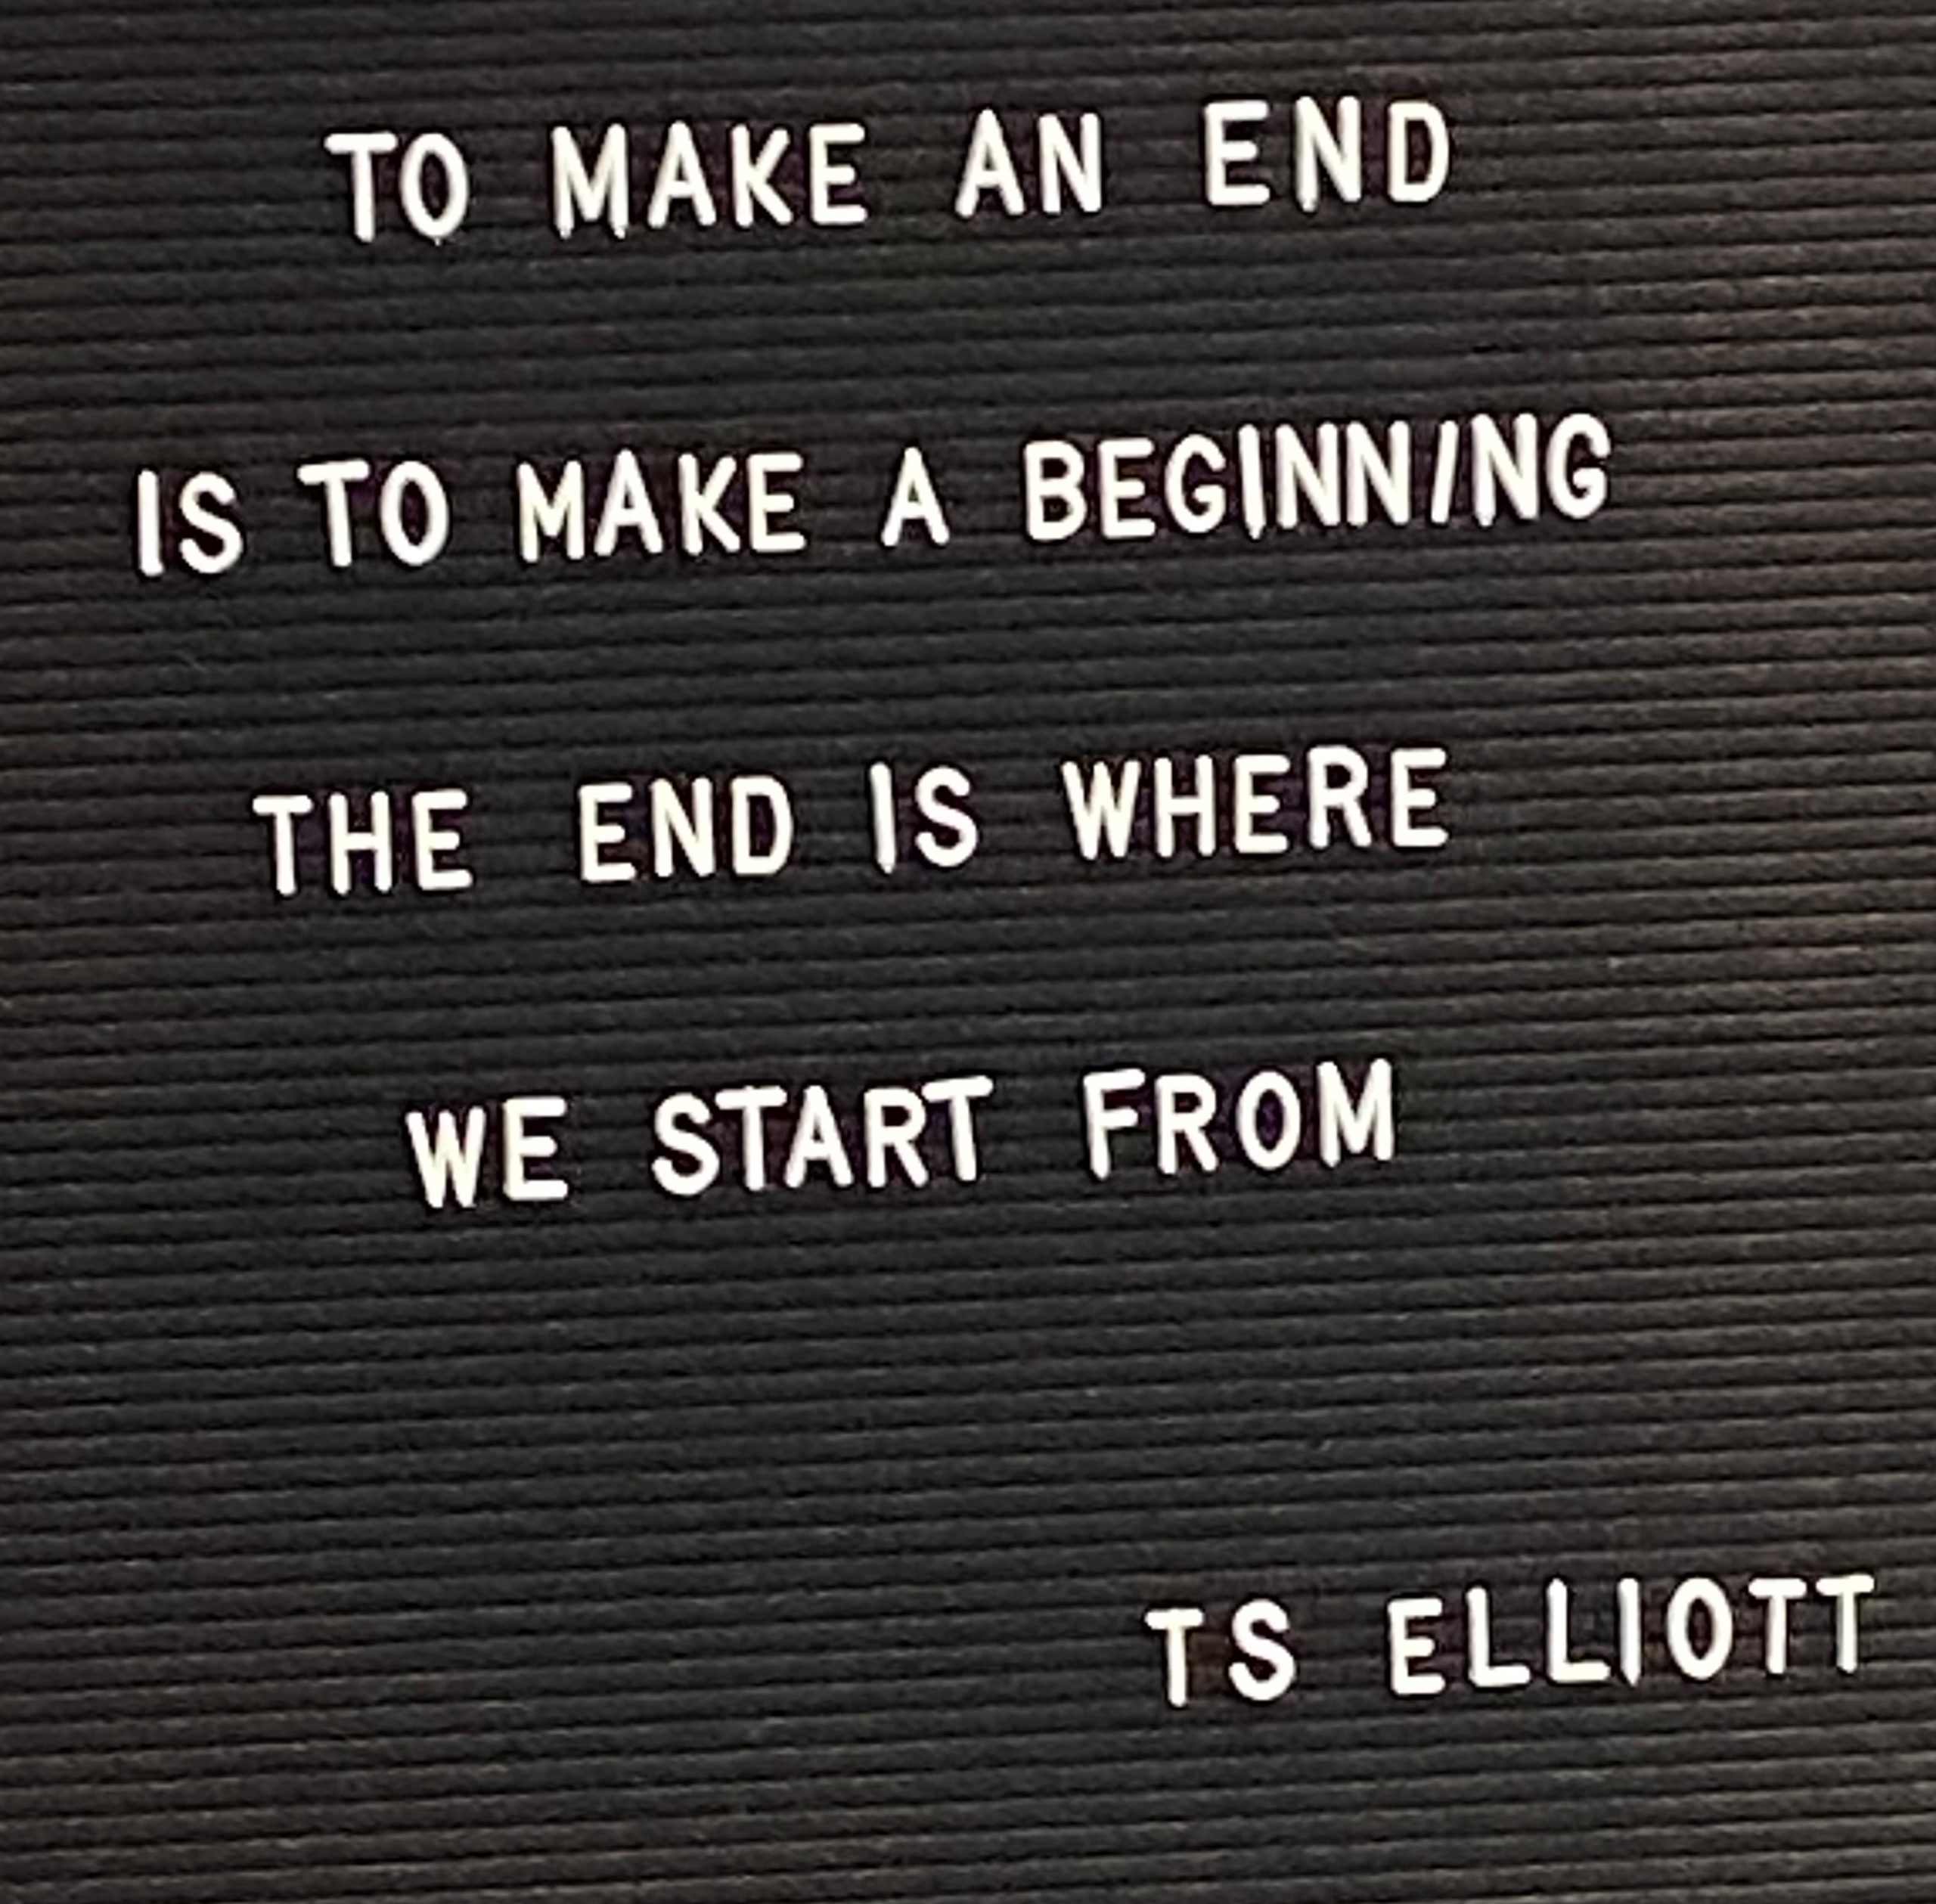 Motivational Quote by TS Elliot